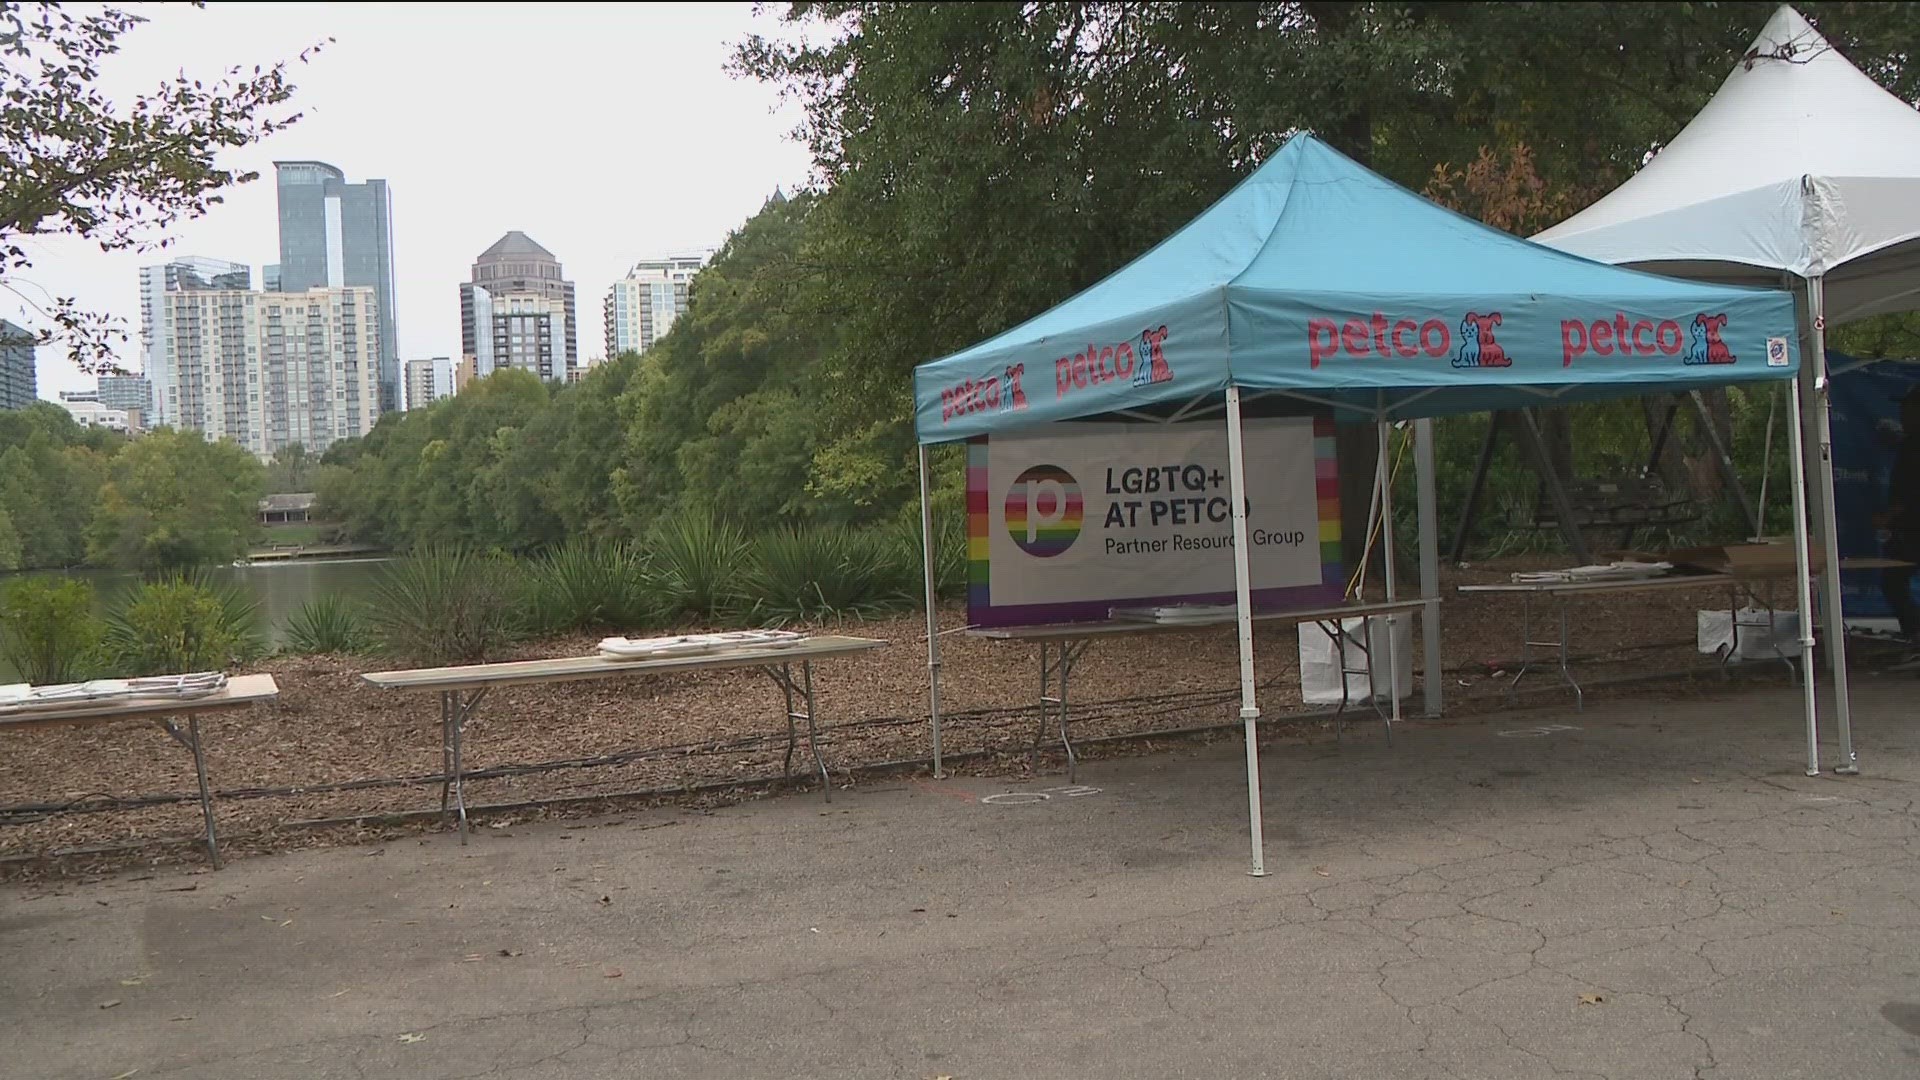 Atlanta's Pride festival and parade kicks off this weekend amid a political climate in Georgia that has been challenging to LGBTQ rights.